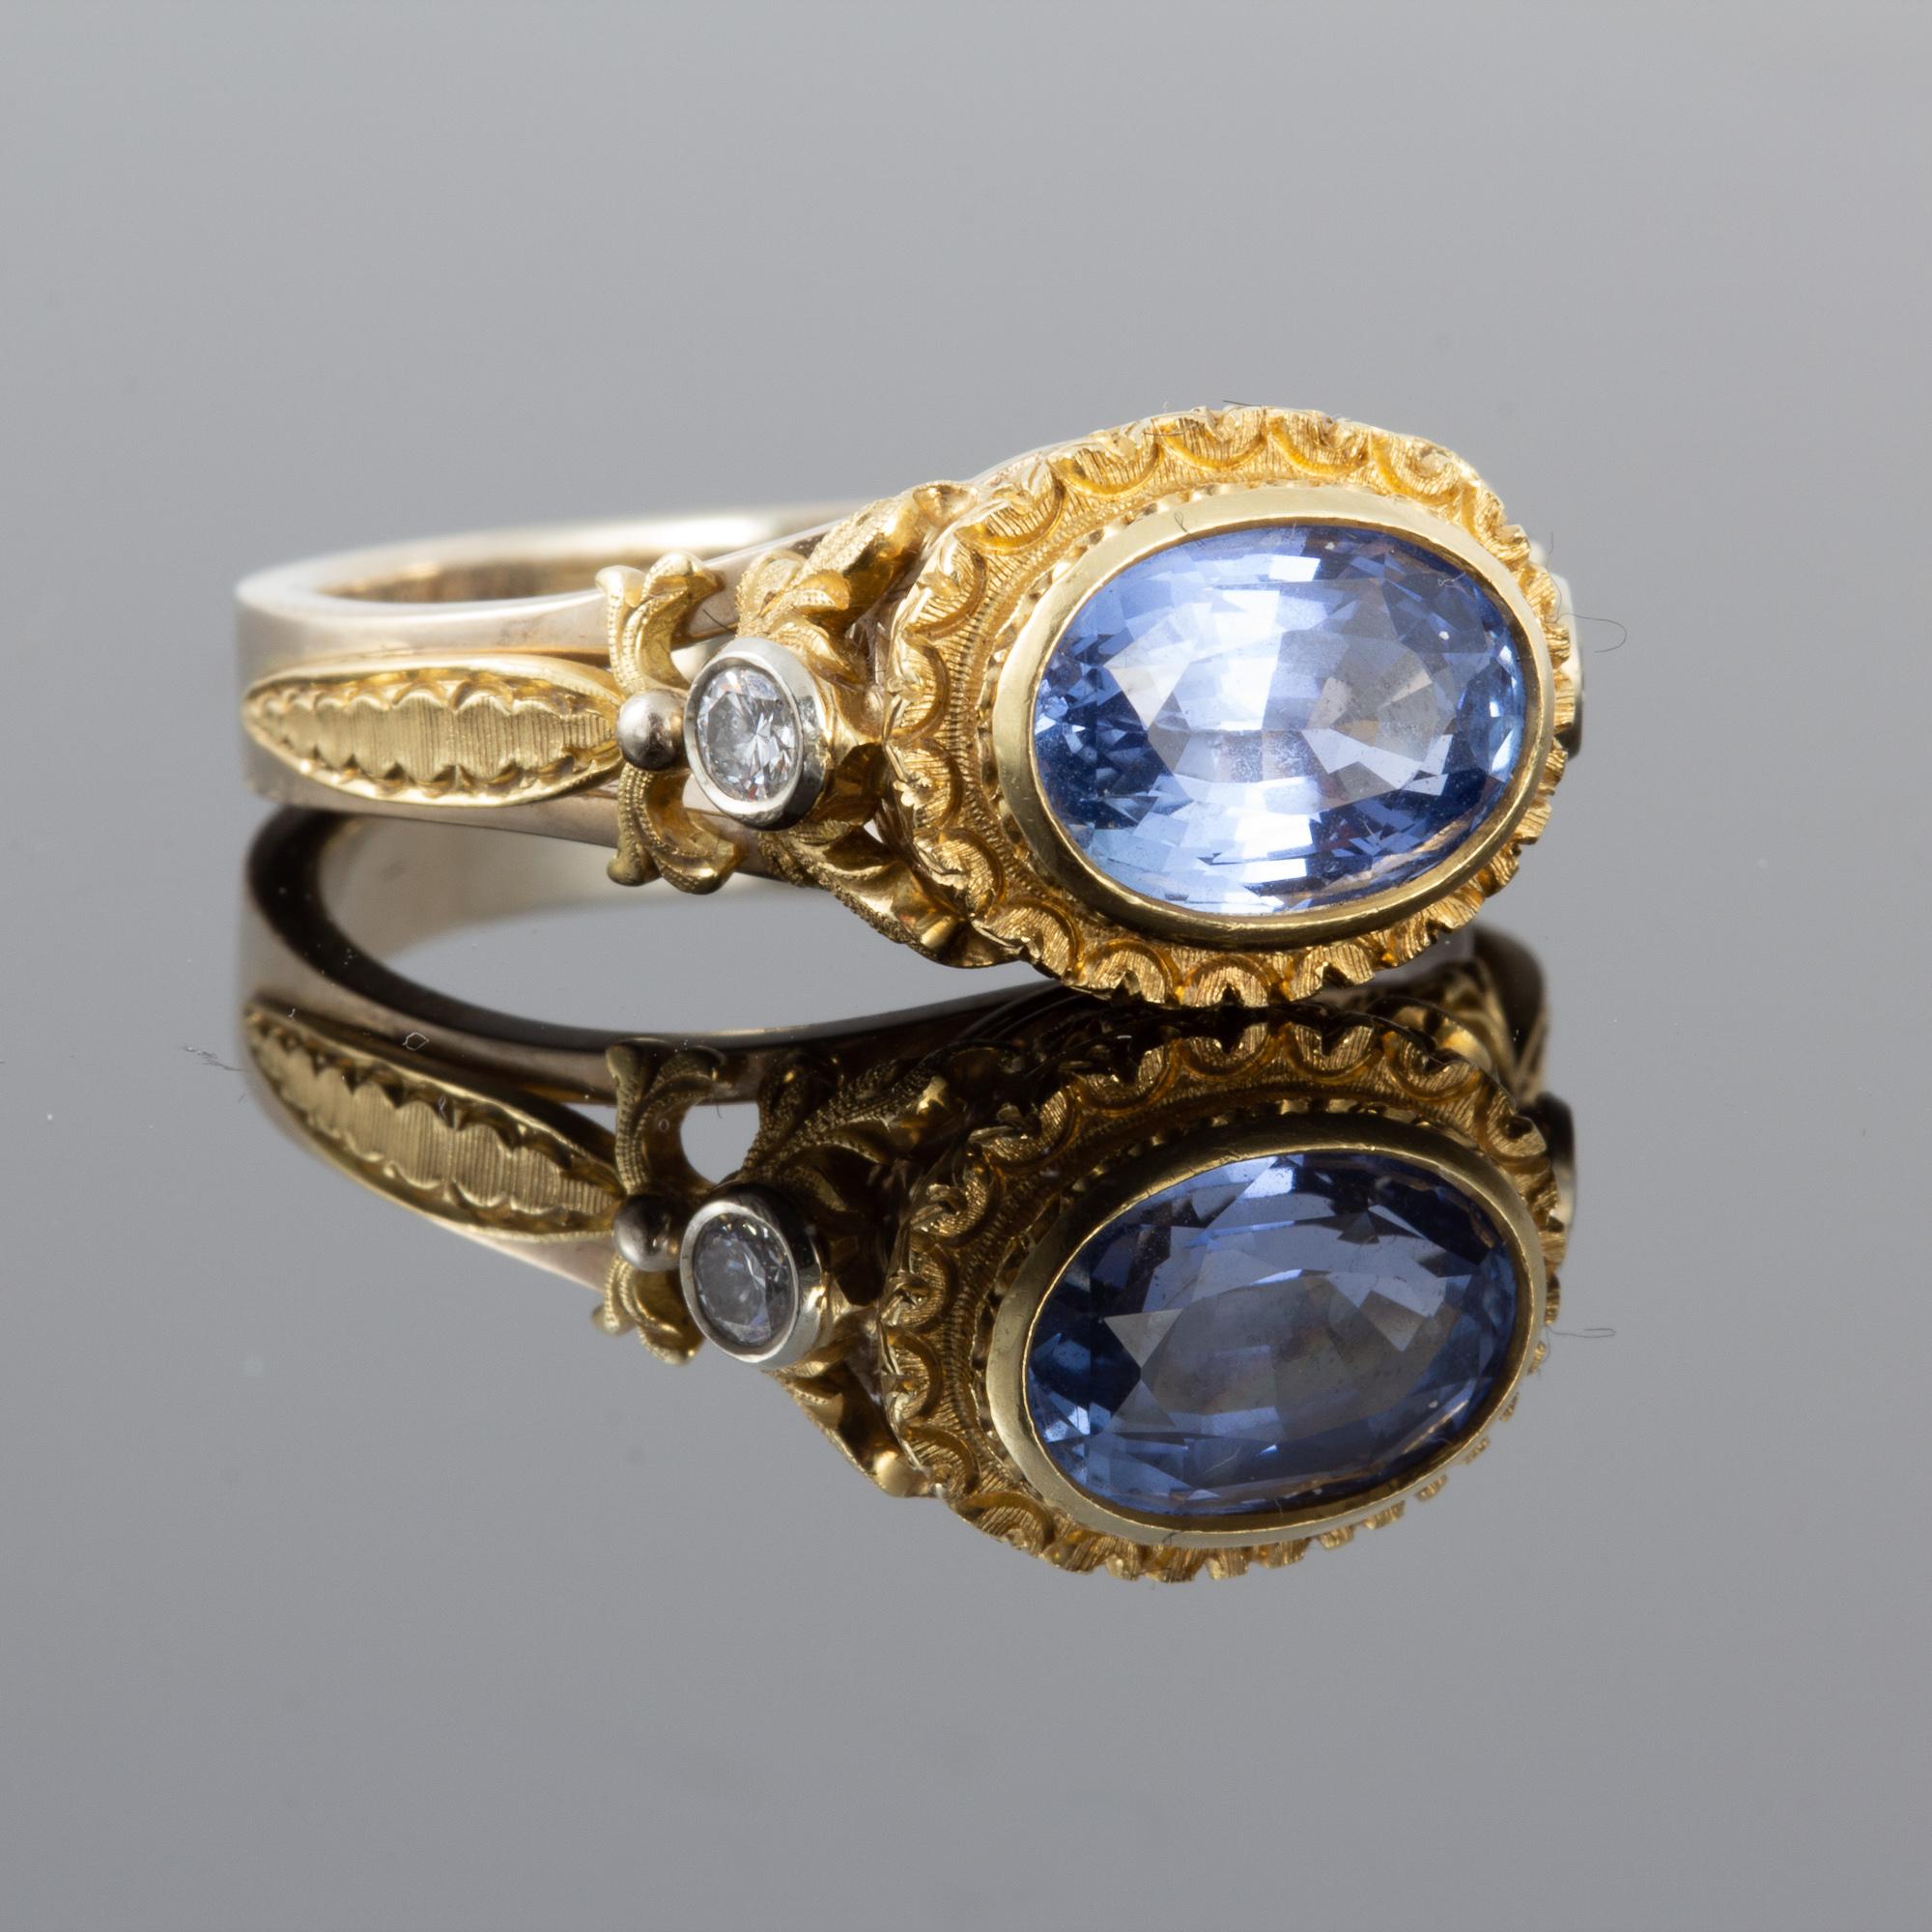 Hand Engraved Ceylon Blue Sapphire and Diamond Ring Set in 18 Karat Gold In Excellent Condition For Sale In Houston, TX